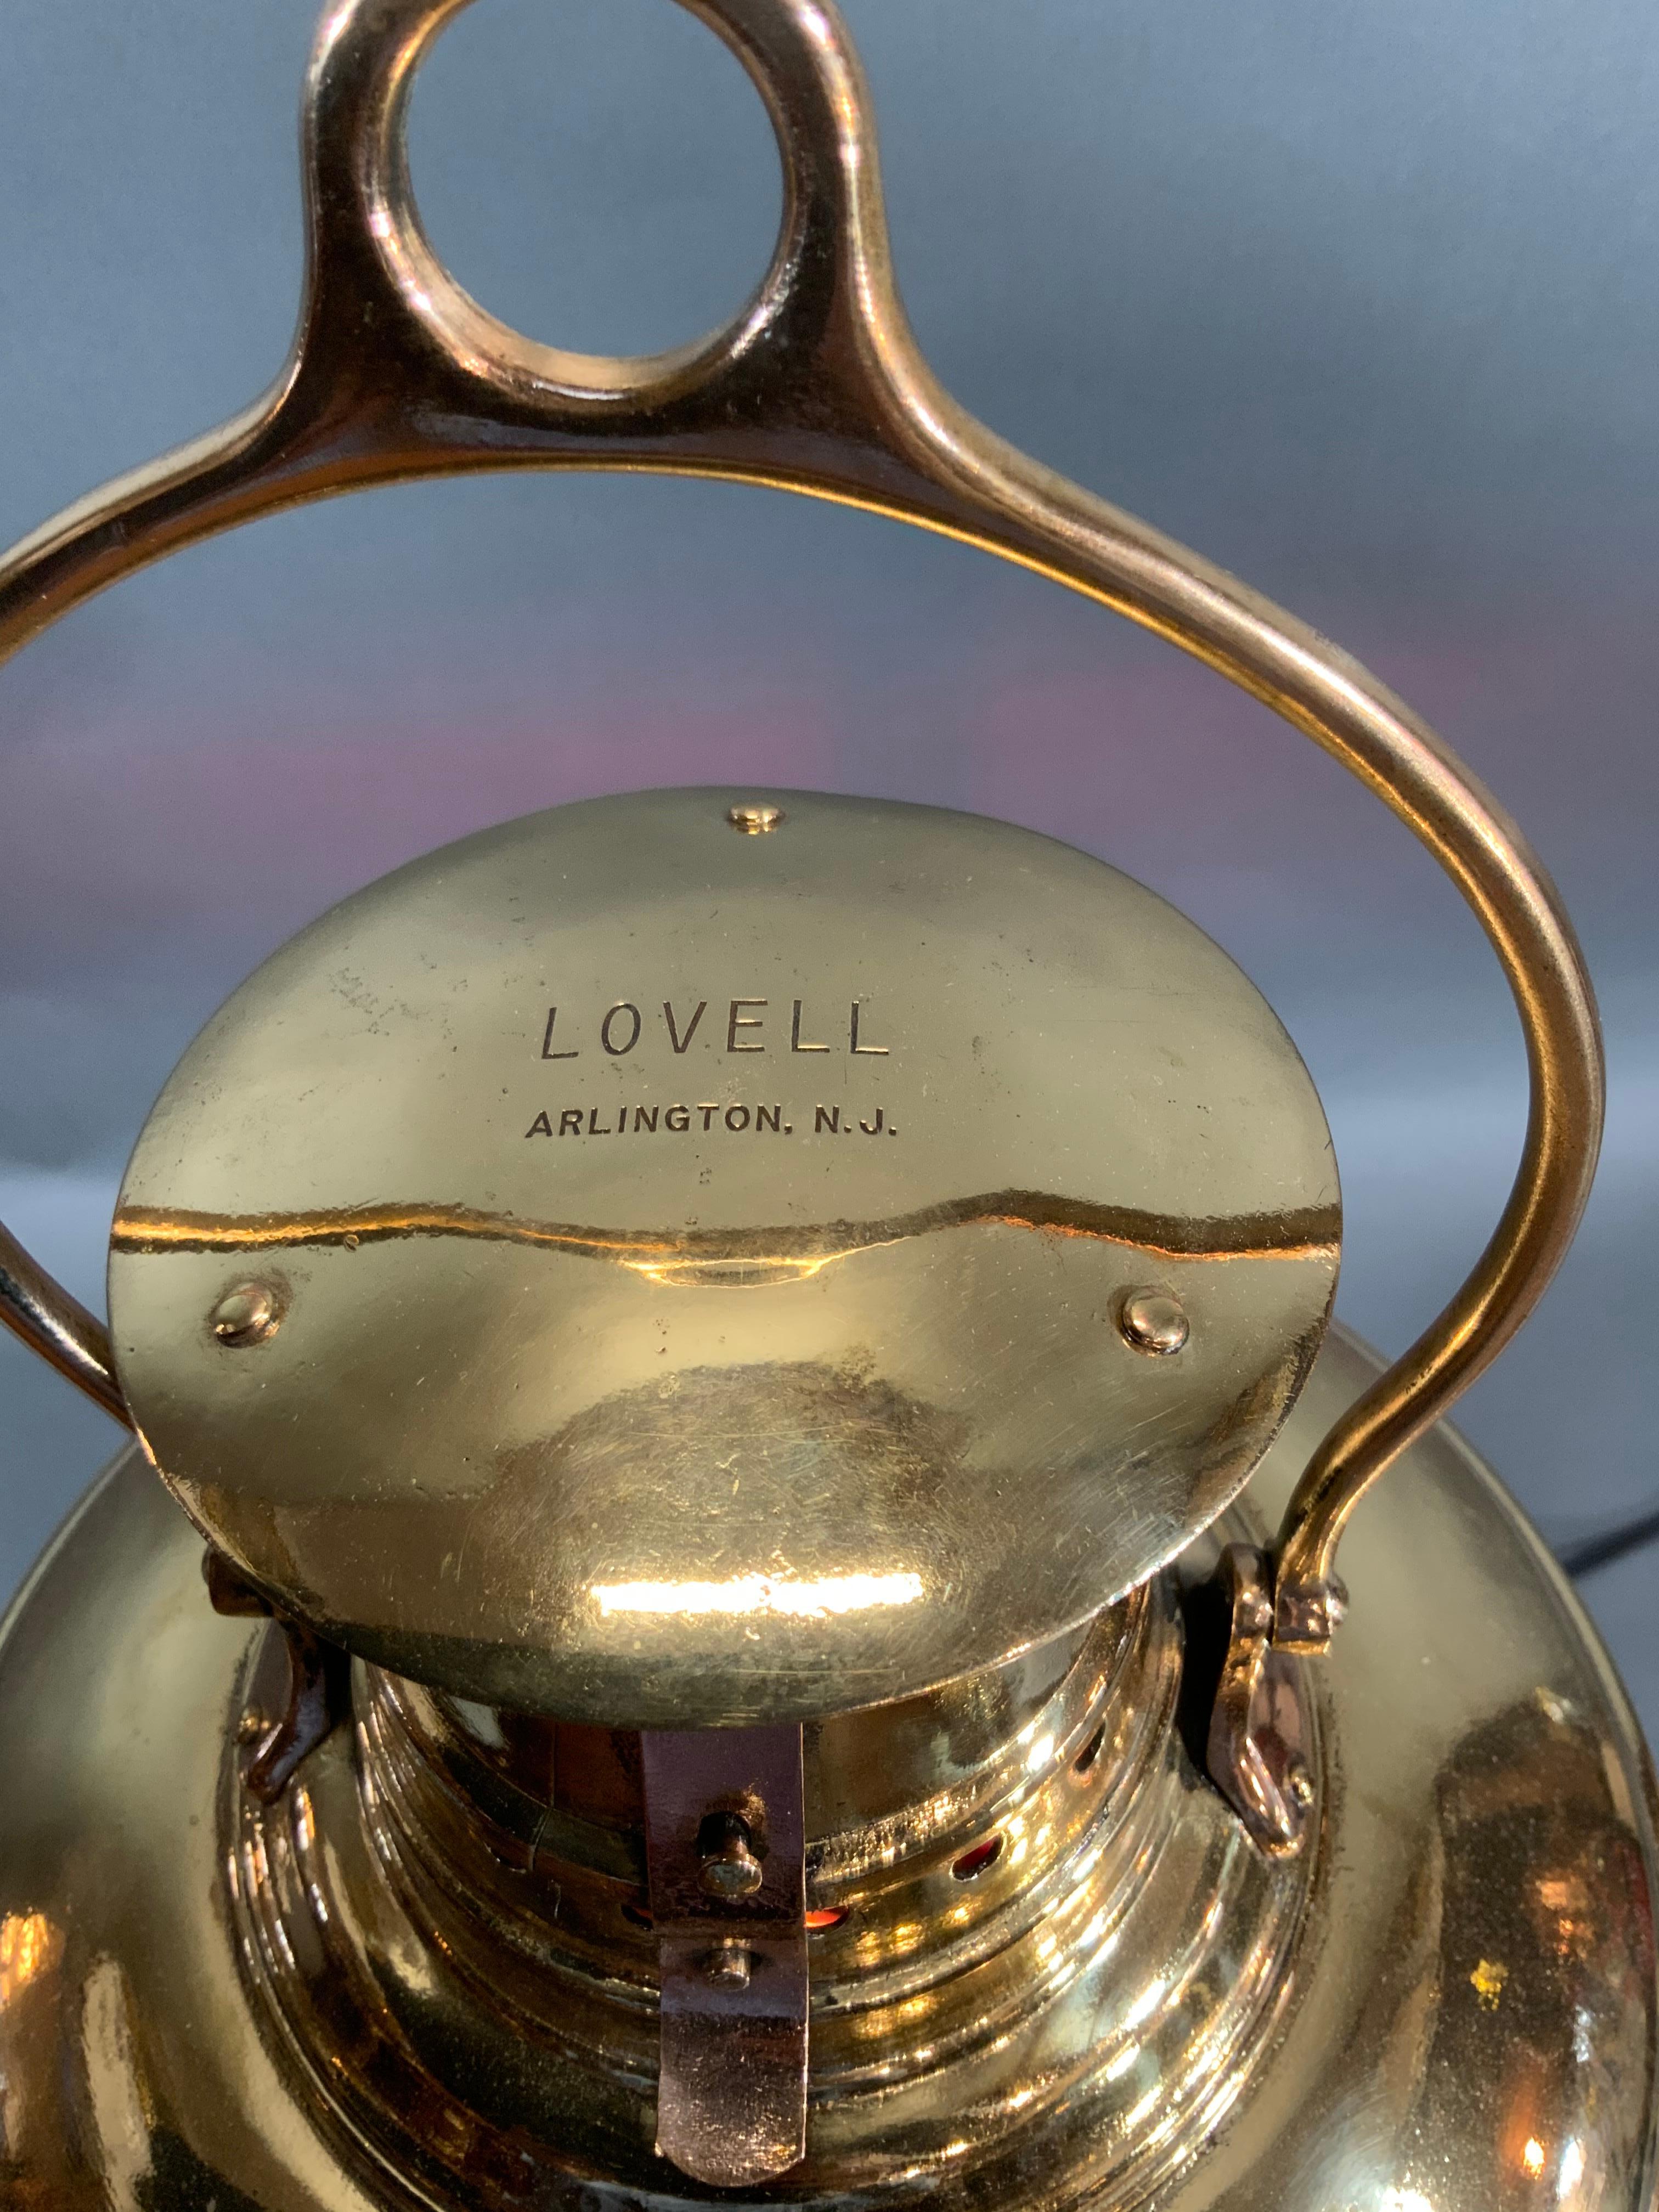 Early 20th Century Solid Brass Ship's Lantern by F.H. Lovell Co. of Arlington, New Jersey For Sale